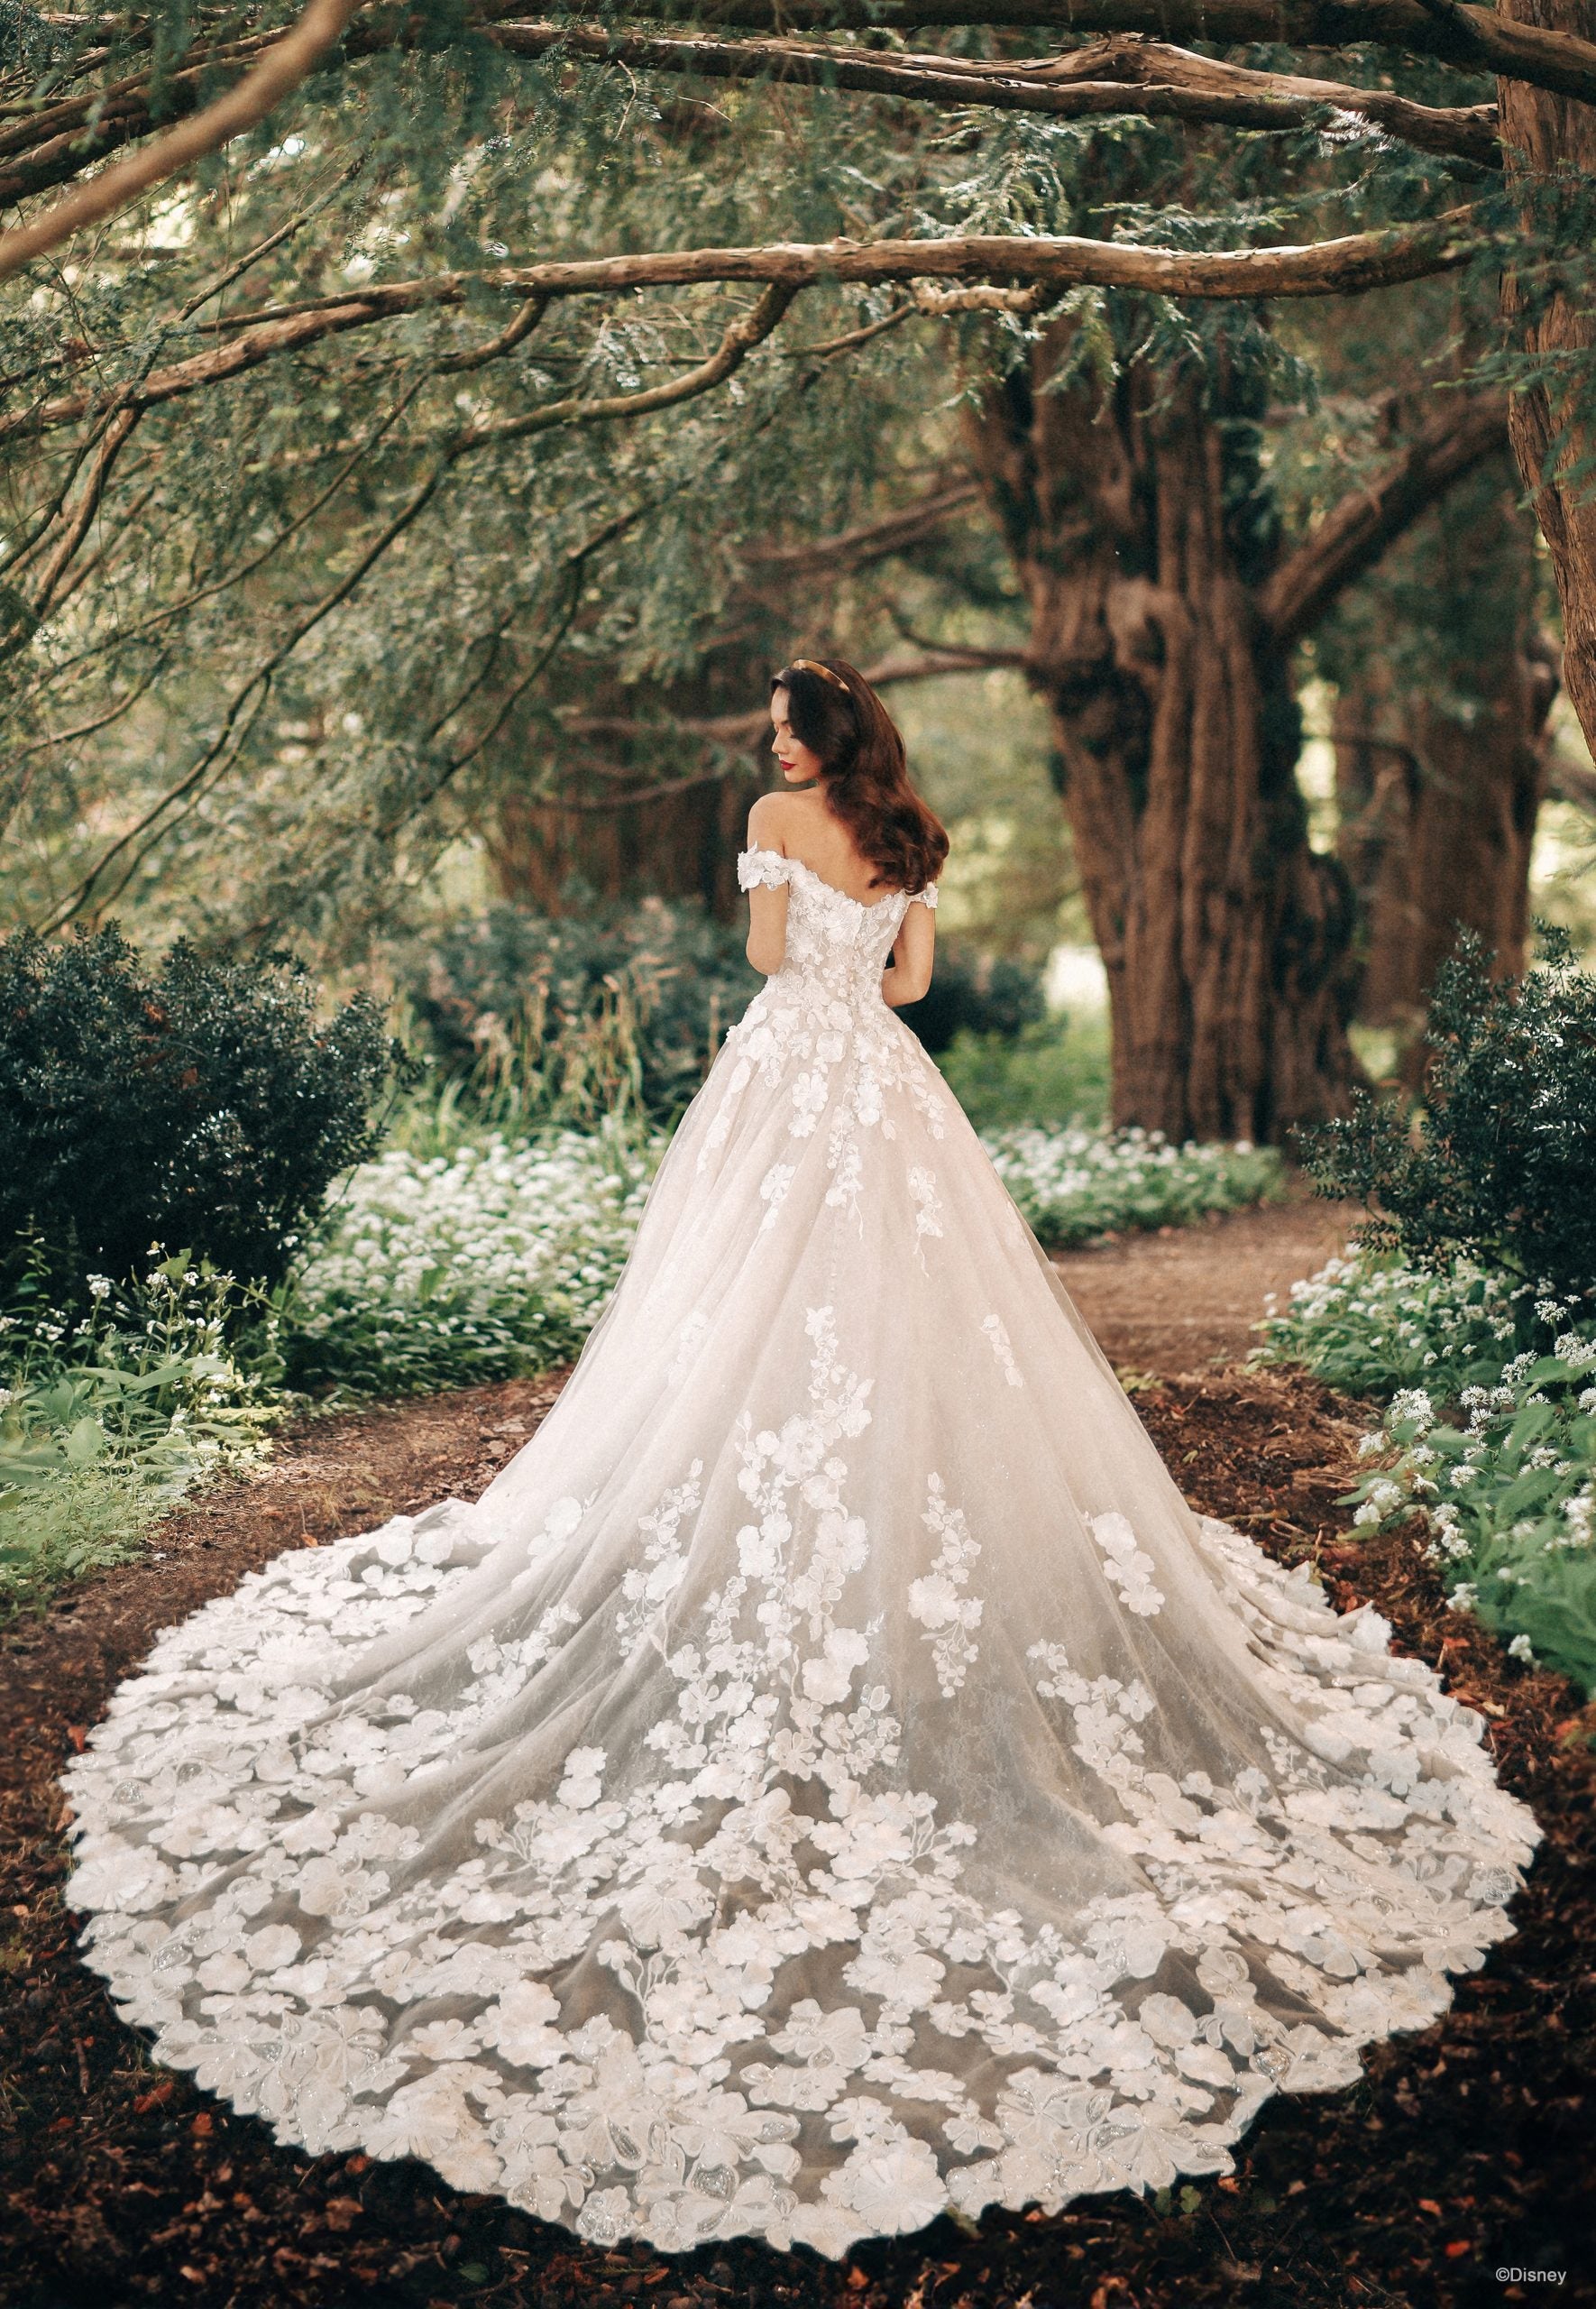 Sleeveless Scoop Neckline Ball Gown Wedding Dress With Beaded Lace And  Tulle Skirt | Kleinfeld Bridal